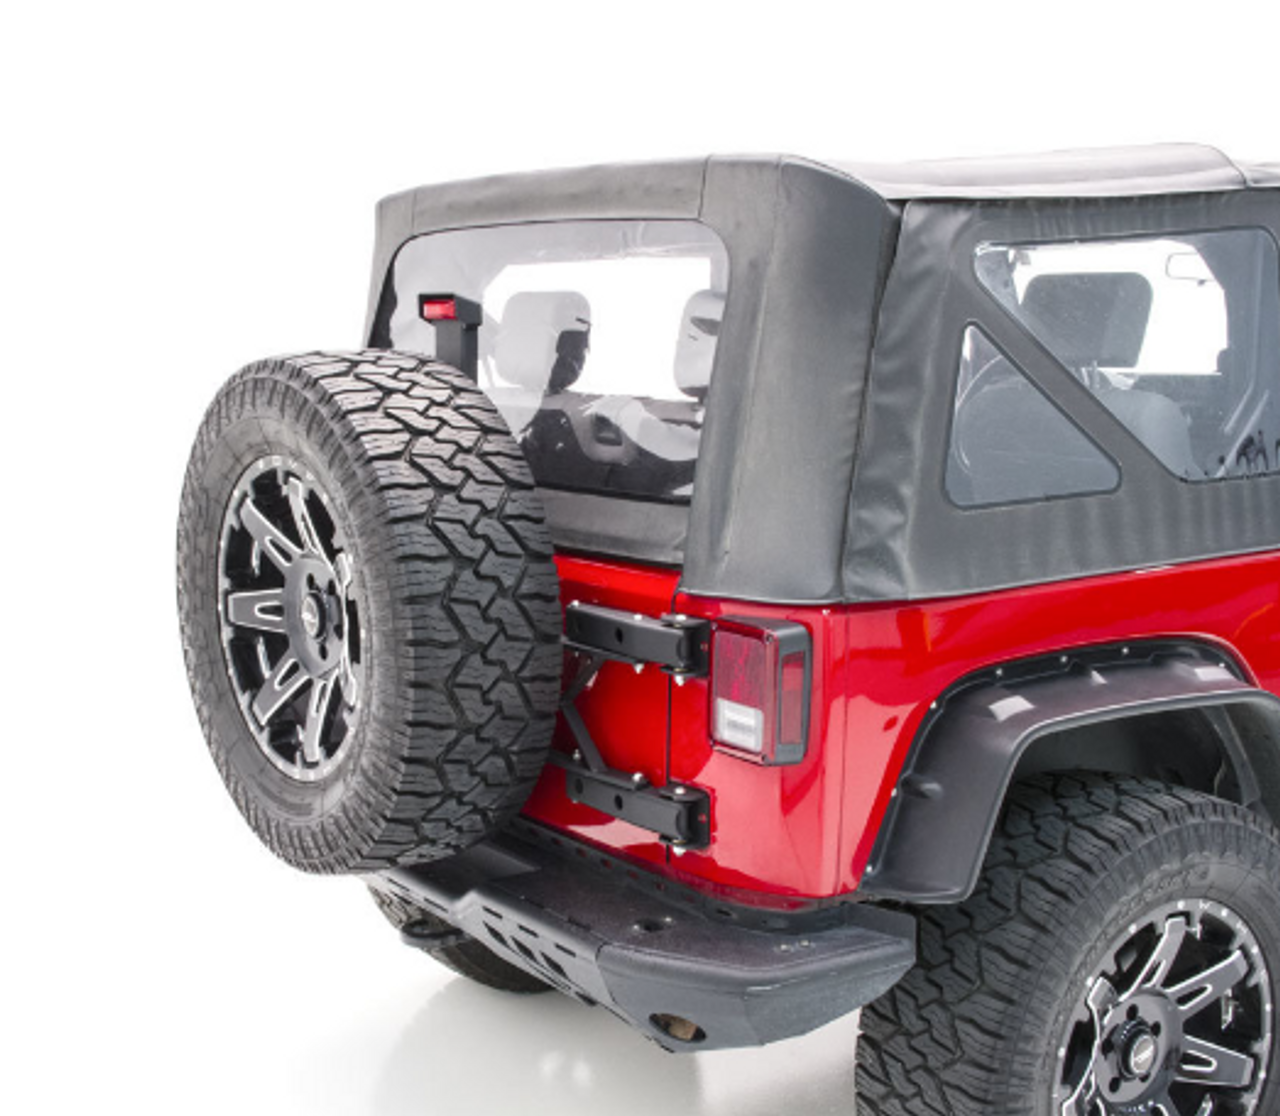 Aries 2563000 Heavy Duty Swing Away Spare Tire Carrier for Jeep Wrangler JK 2007-2018